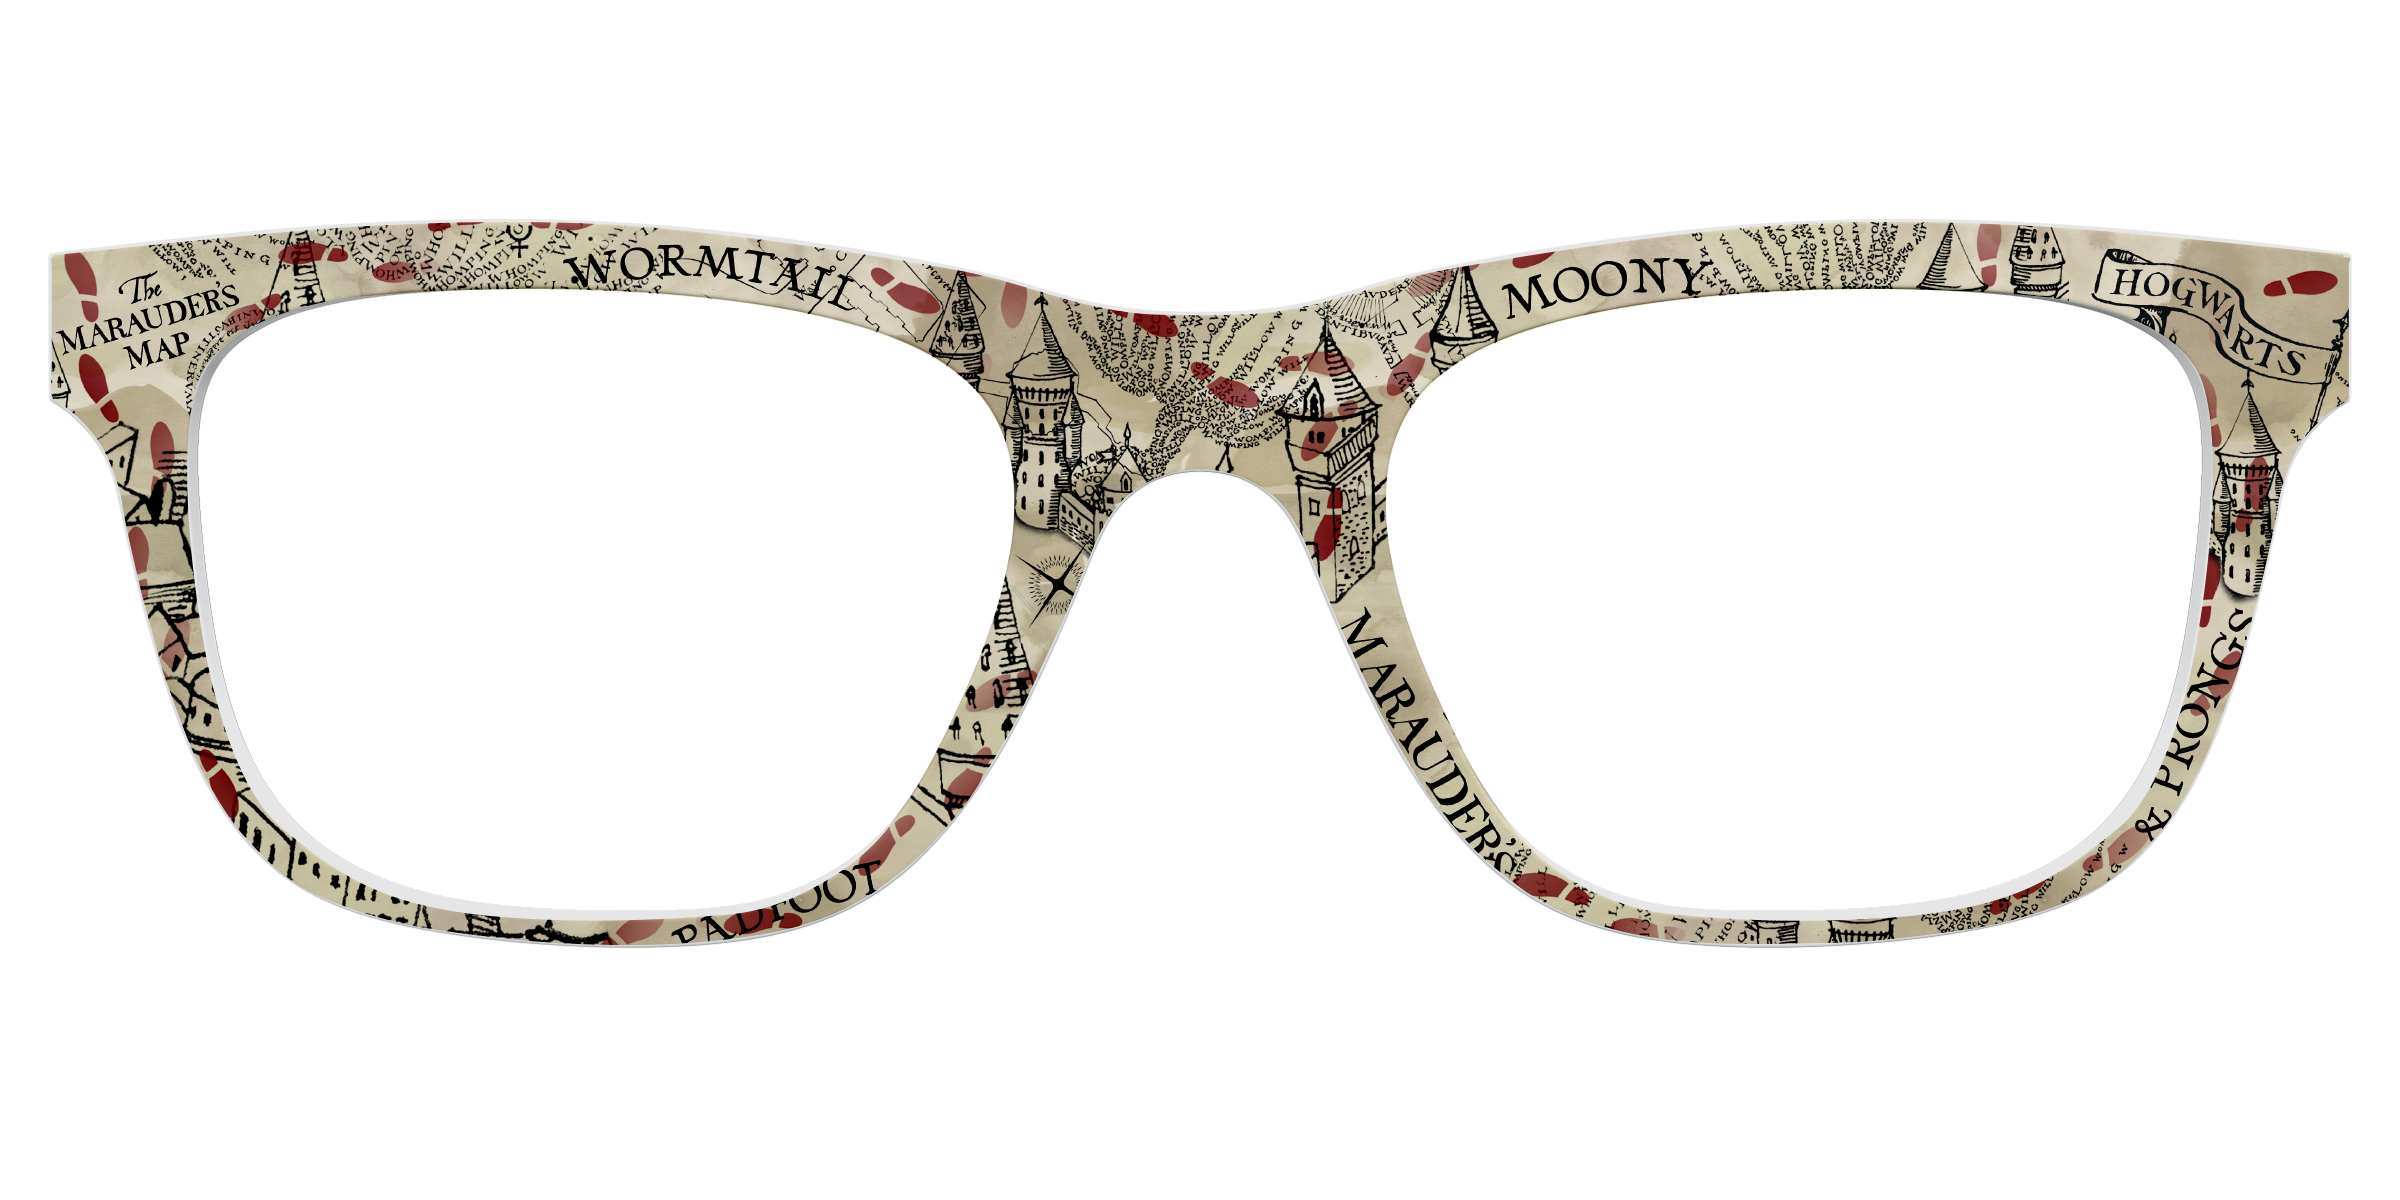 Harry Potter The Marauders Map Glasses Case